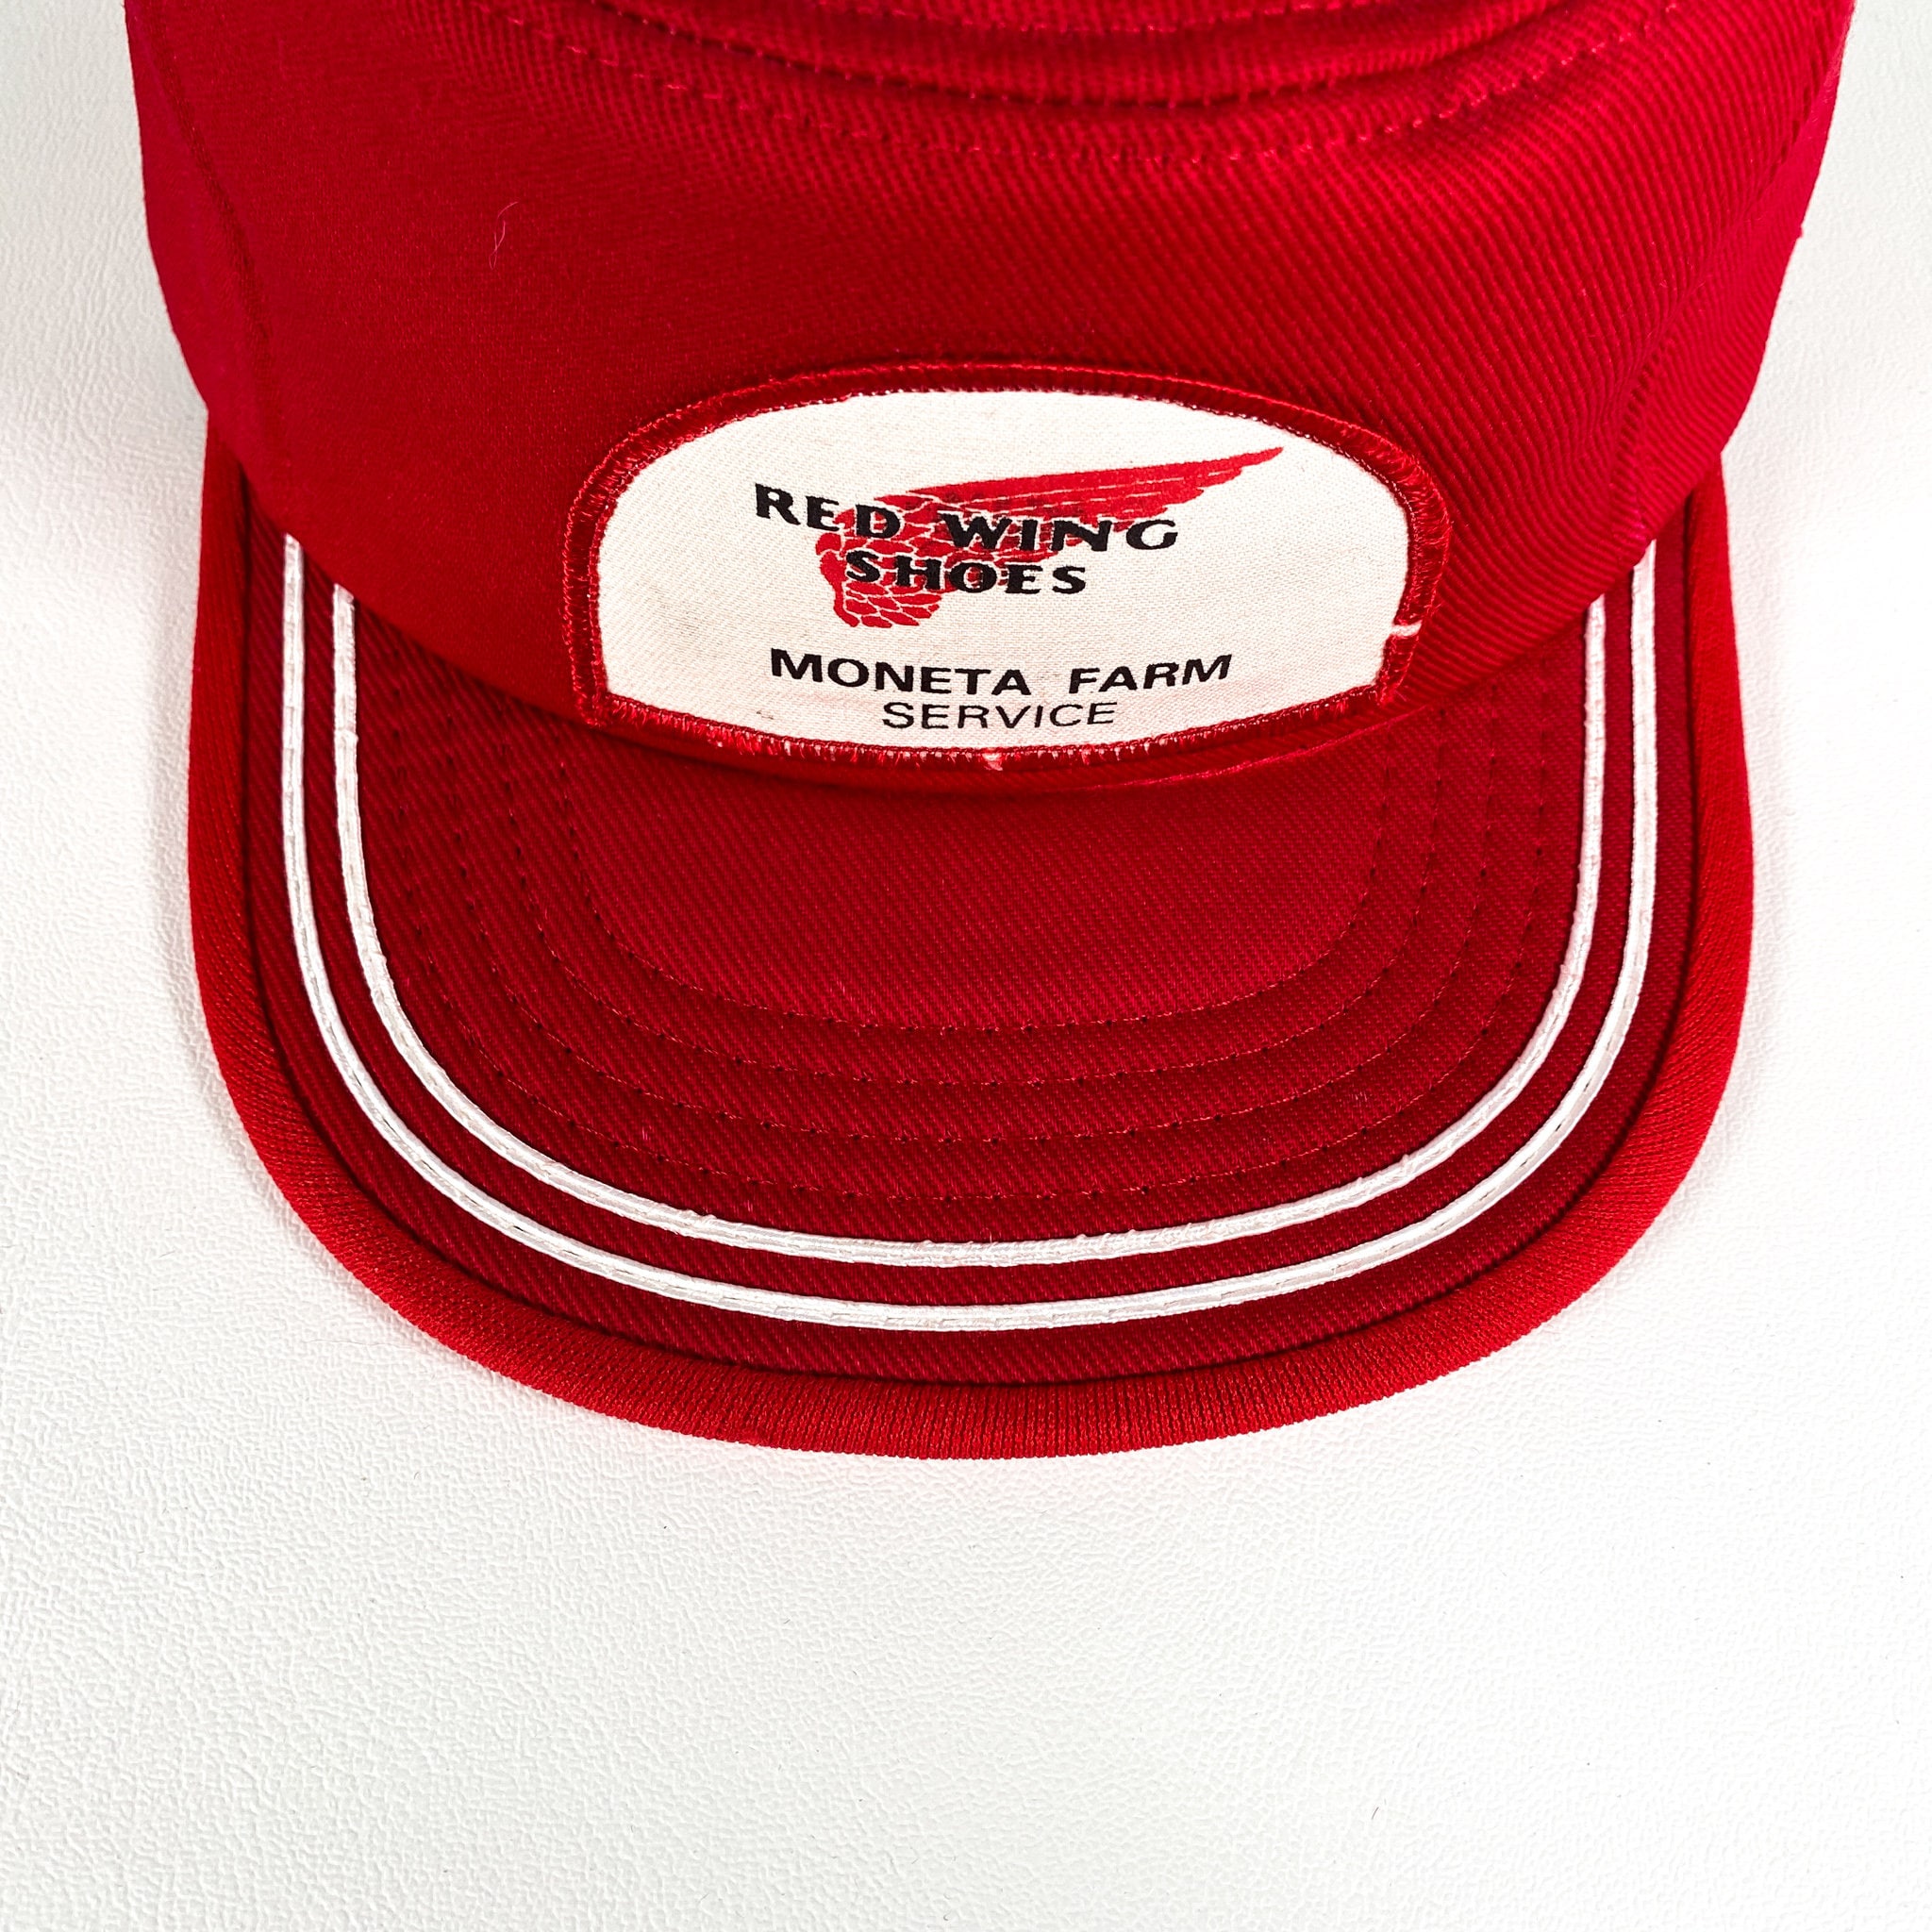 Vintage red wing shoes hat trucker hat  Red wing shoes, Wing shoes,  Trucker hat